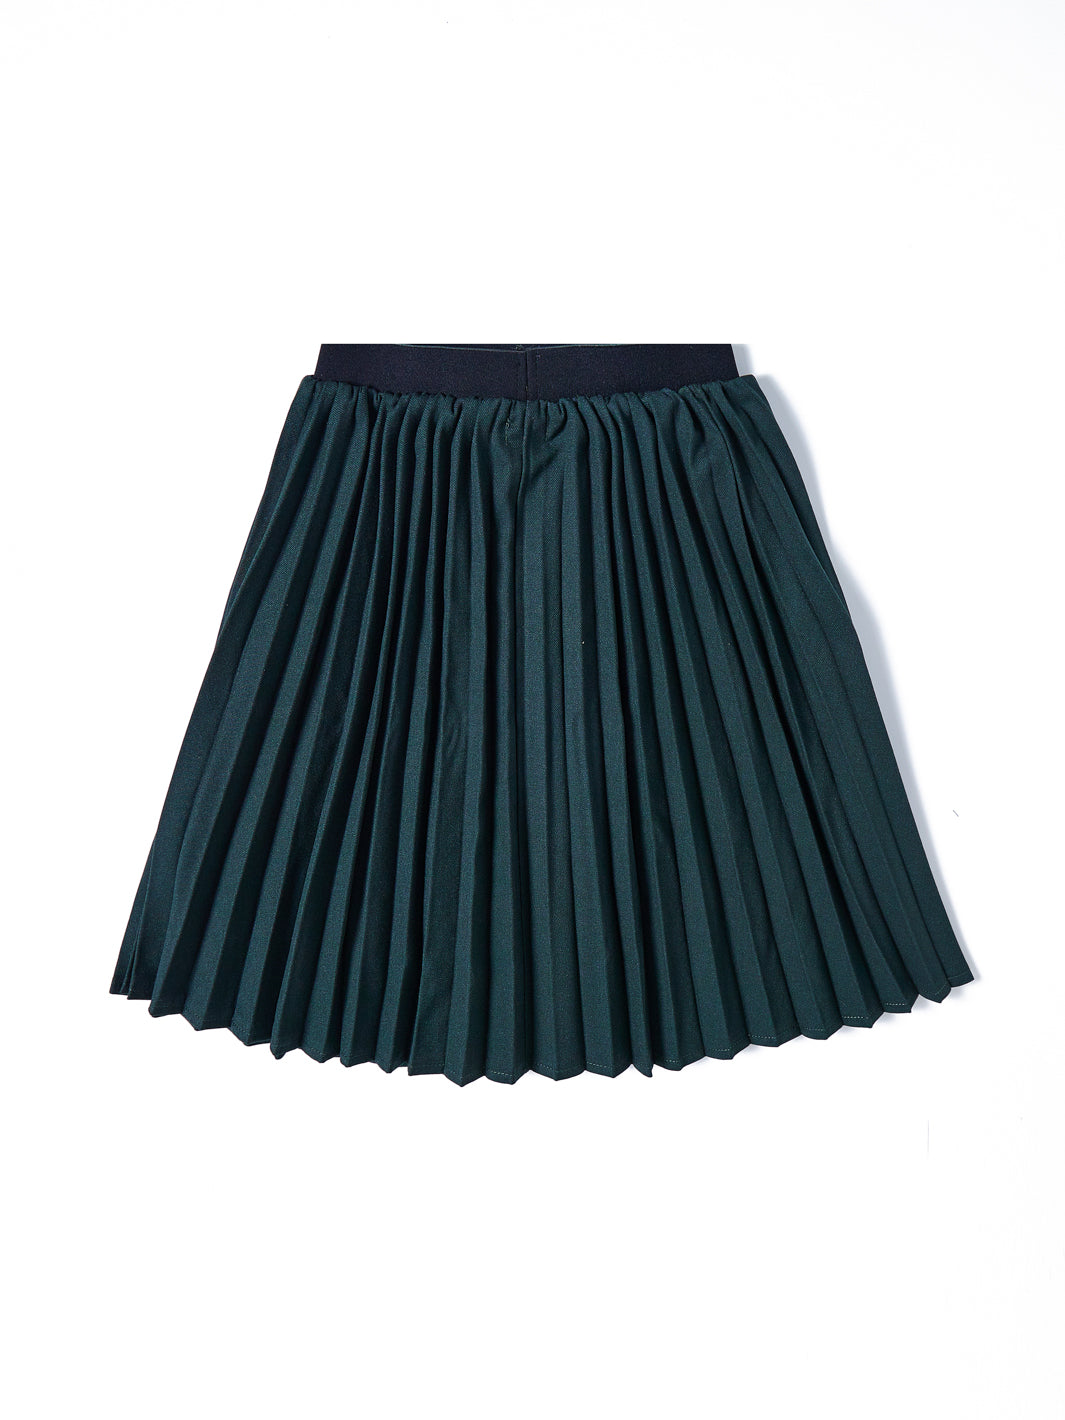 Brushed Accordion Pleated Skirt - Green